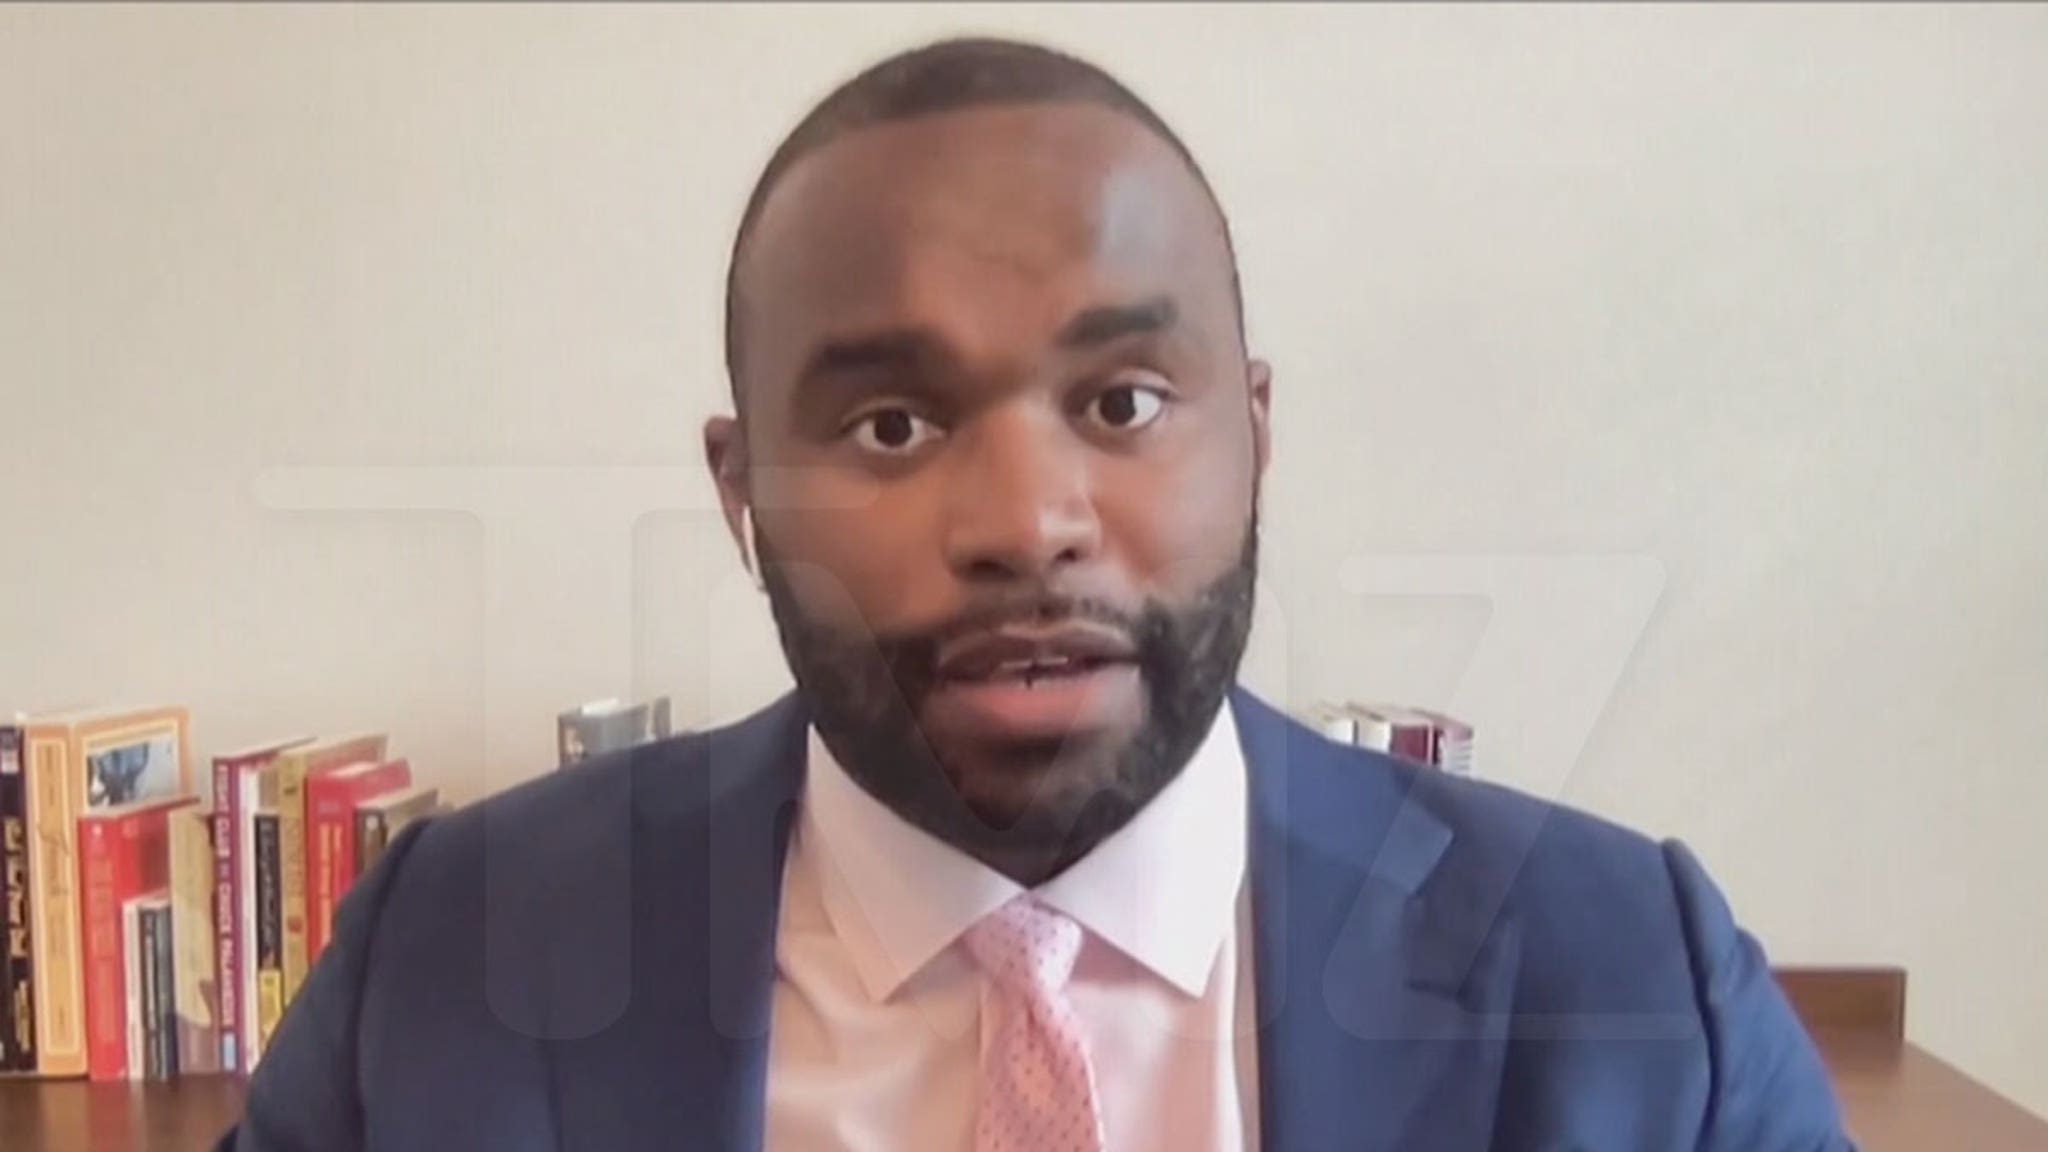 Dr. Myron Rolle Knew He Would Be Neurosurgeon After NFL, Credits Ben Carson thumbnail